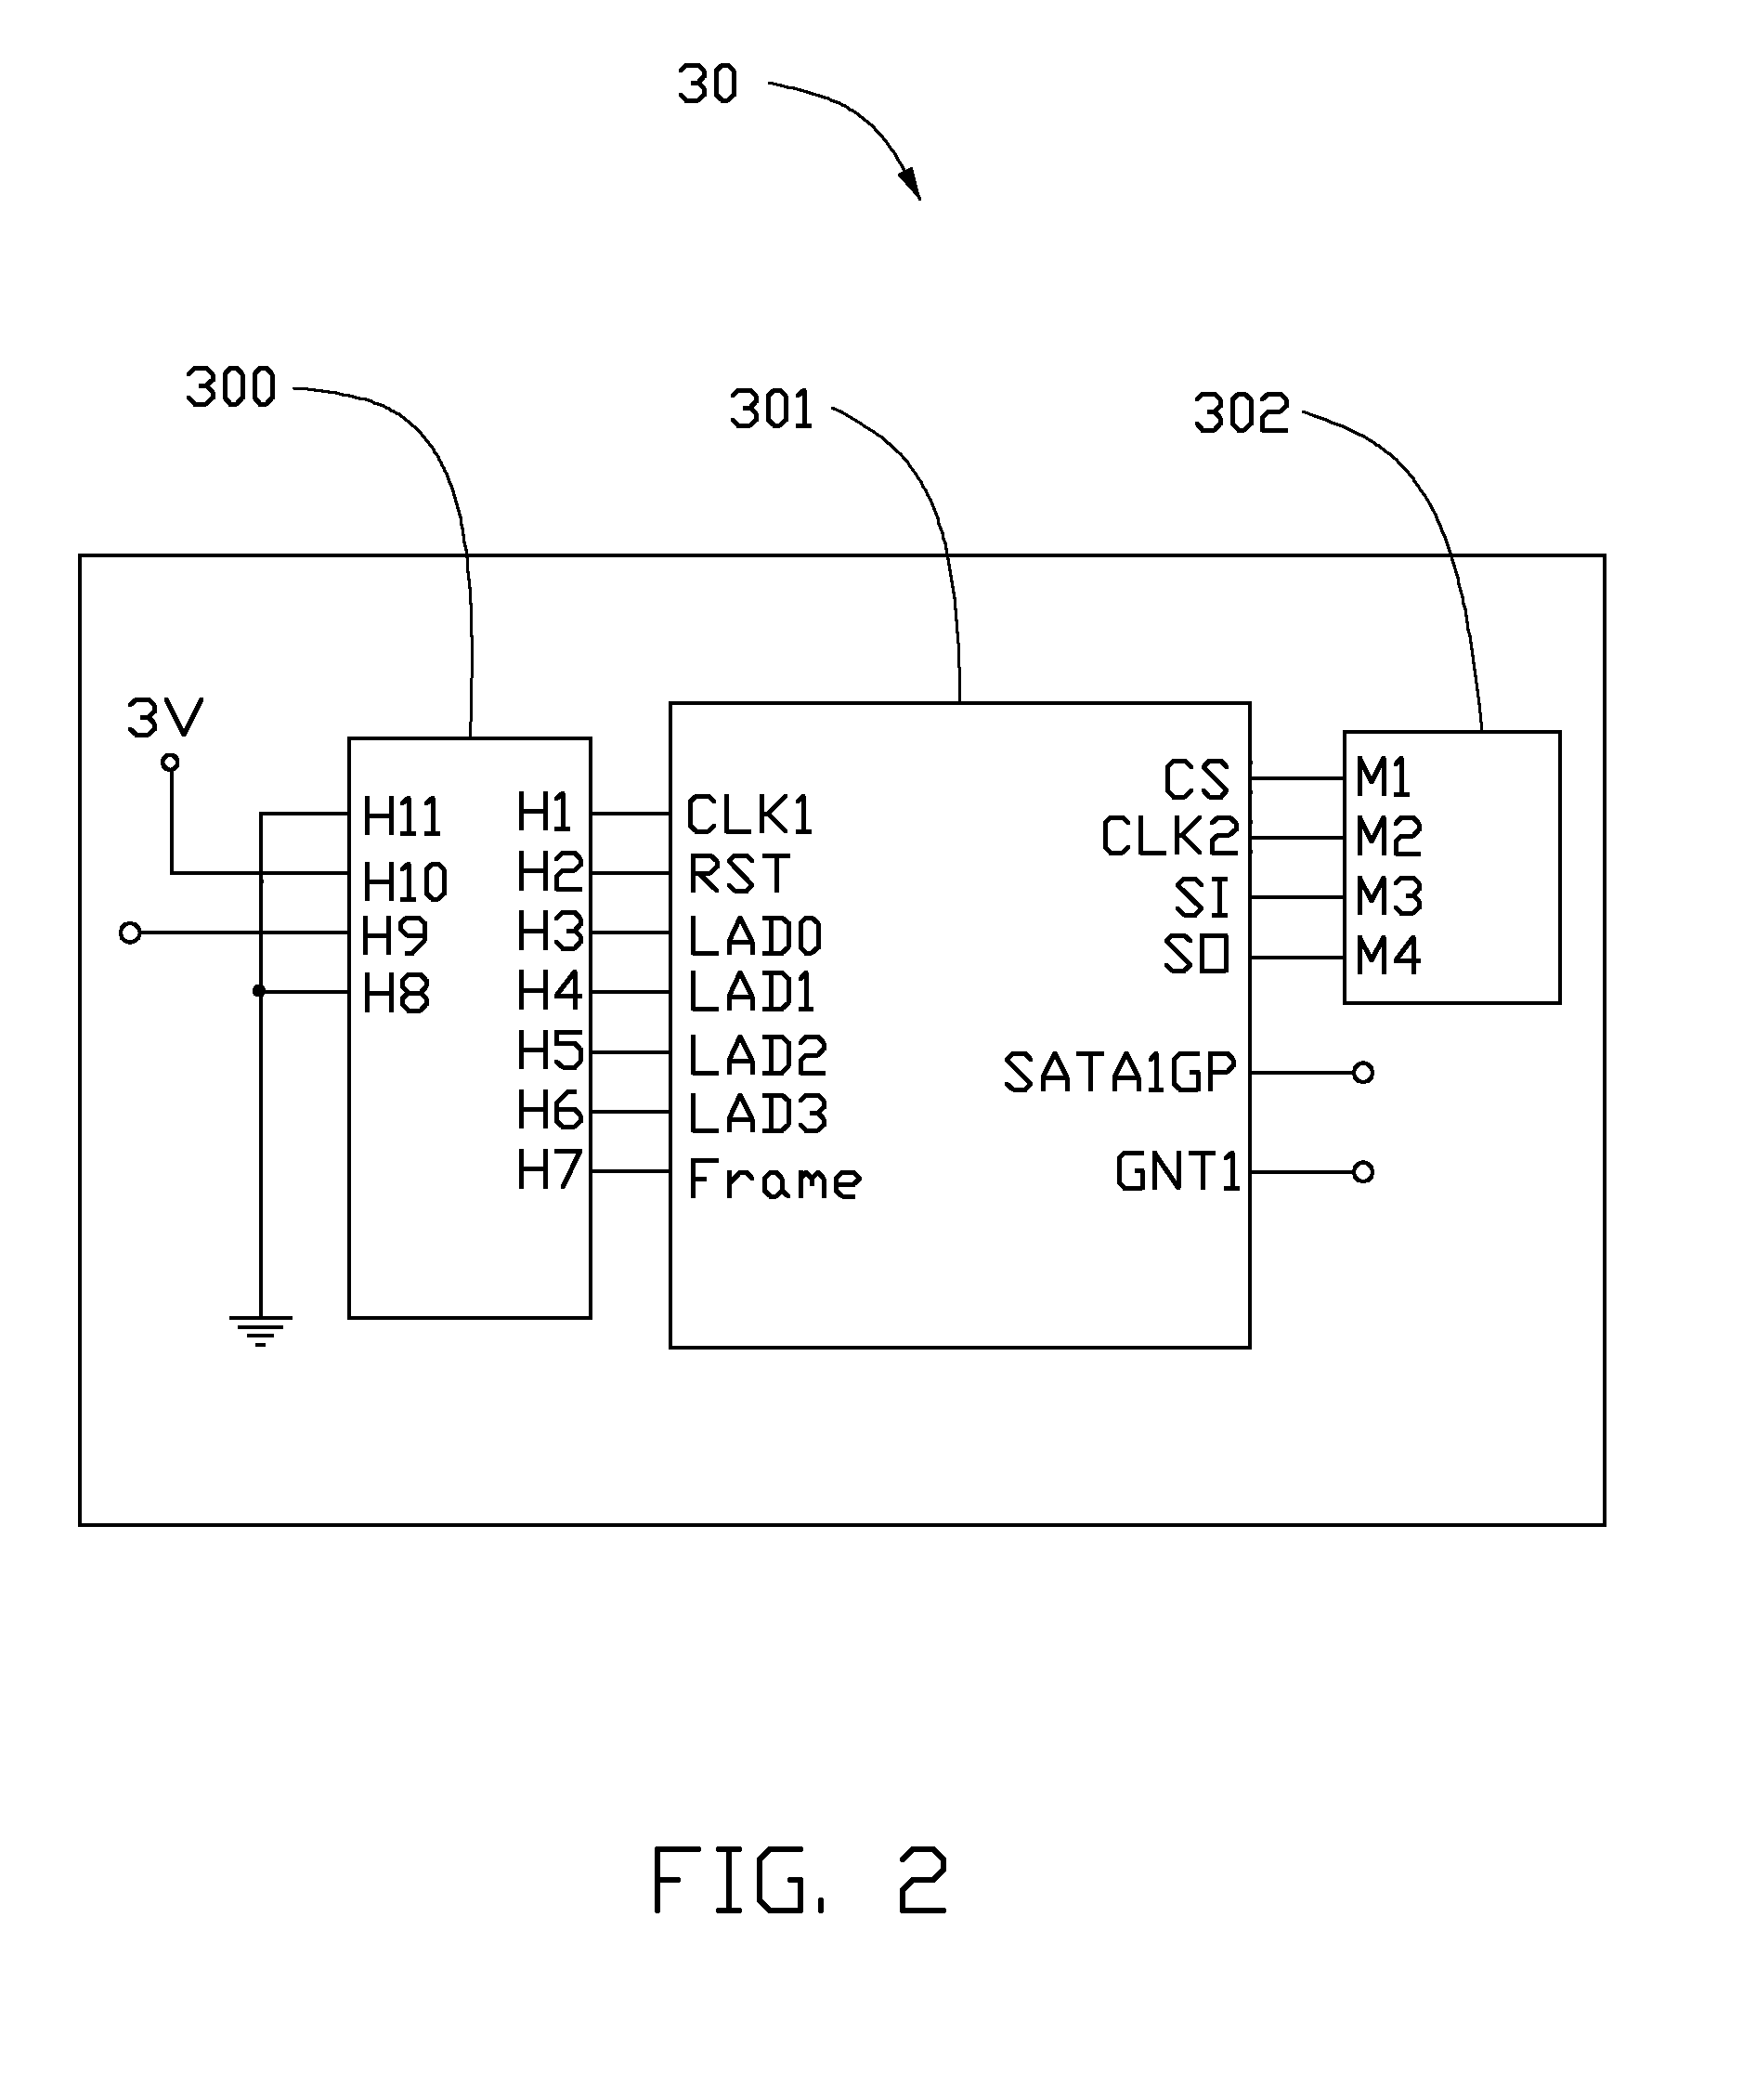 Switch apparatus switching between basic input output system chip and diagnostic card